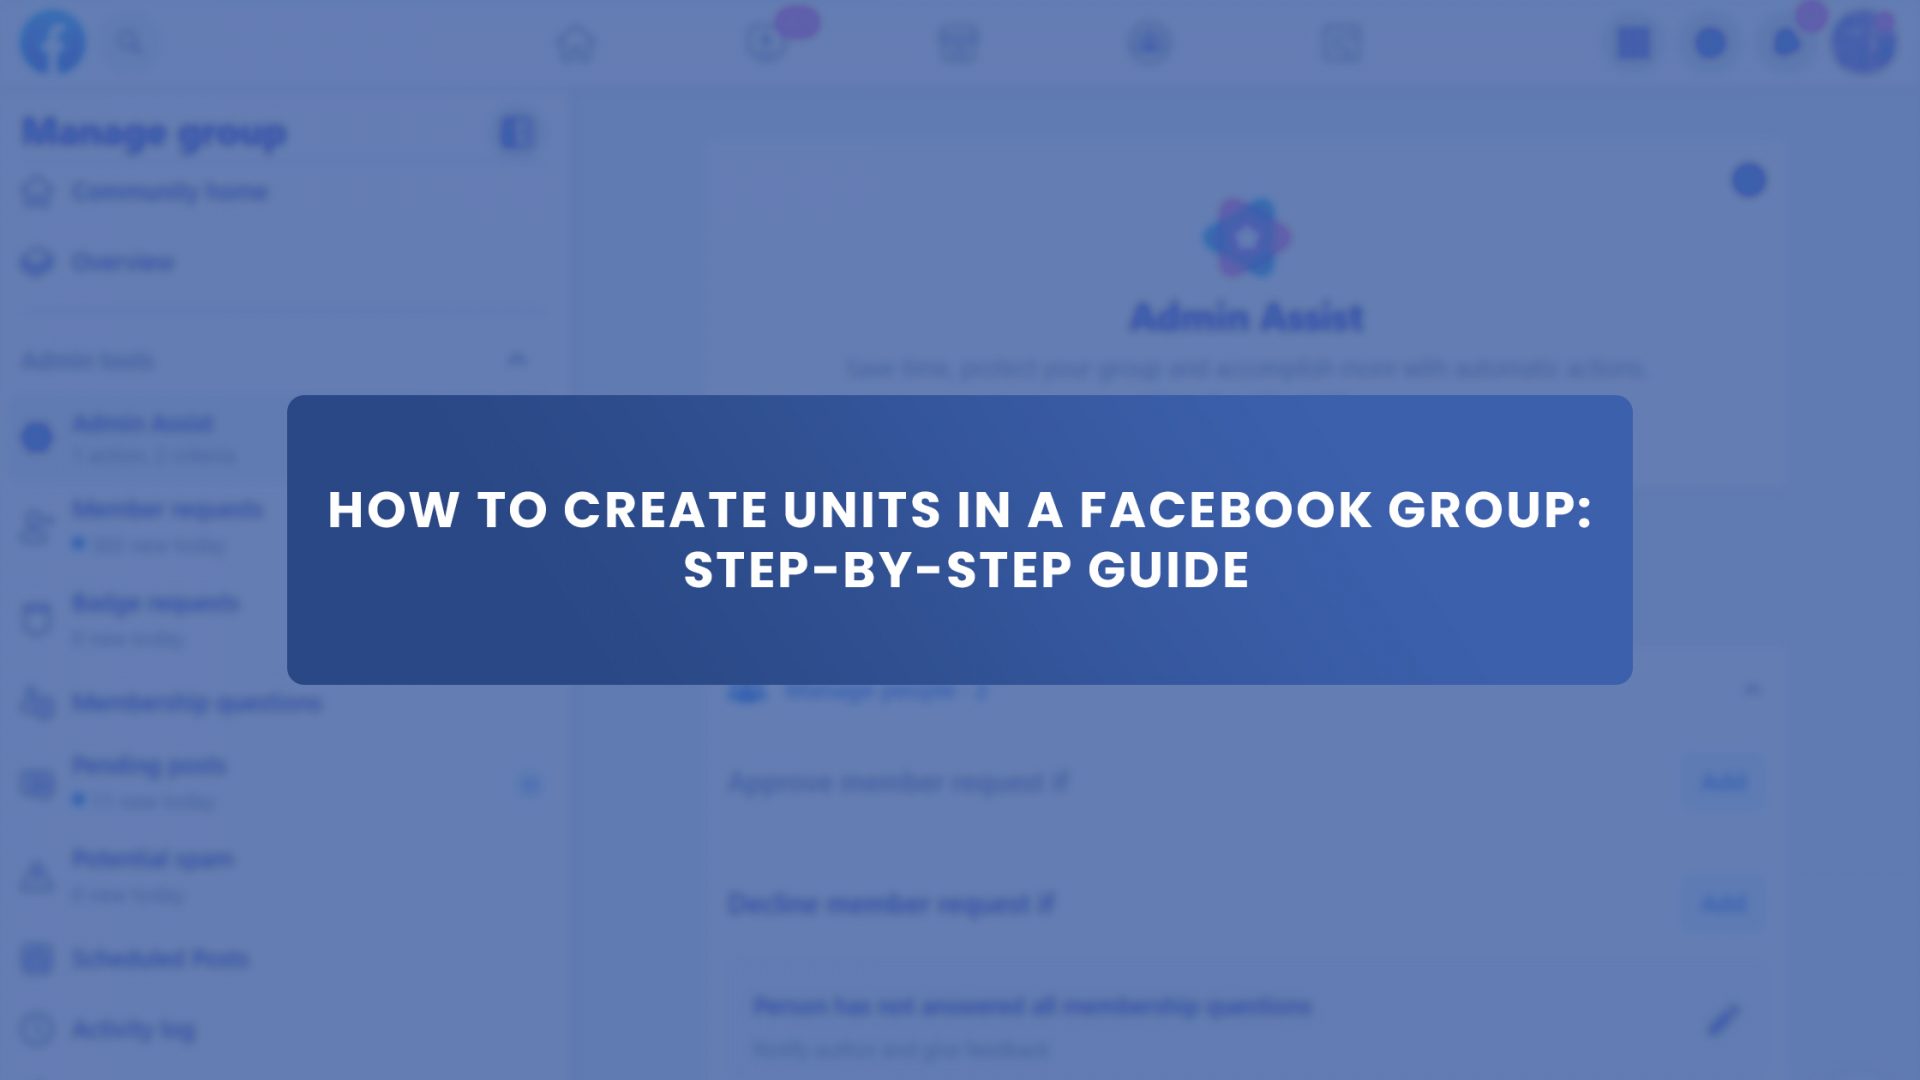 How To Create Units In a Facebook Group- Step-by-Step Guide